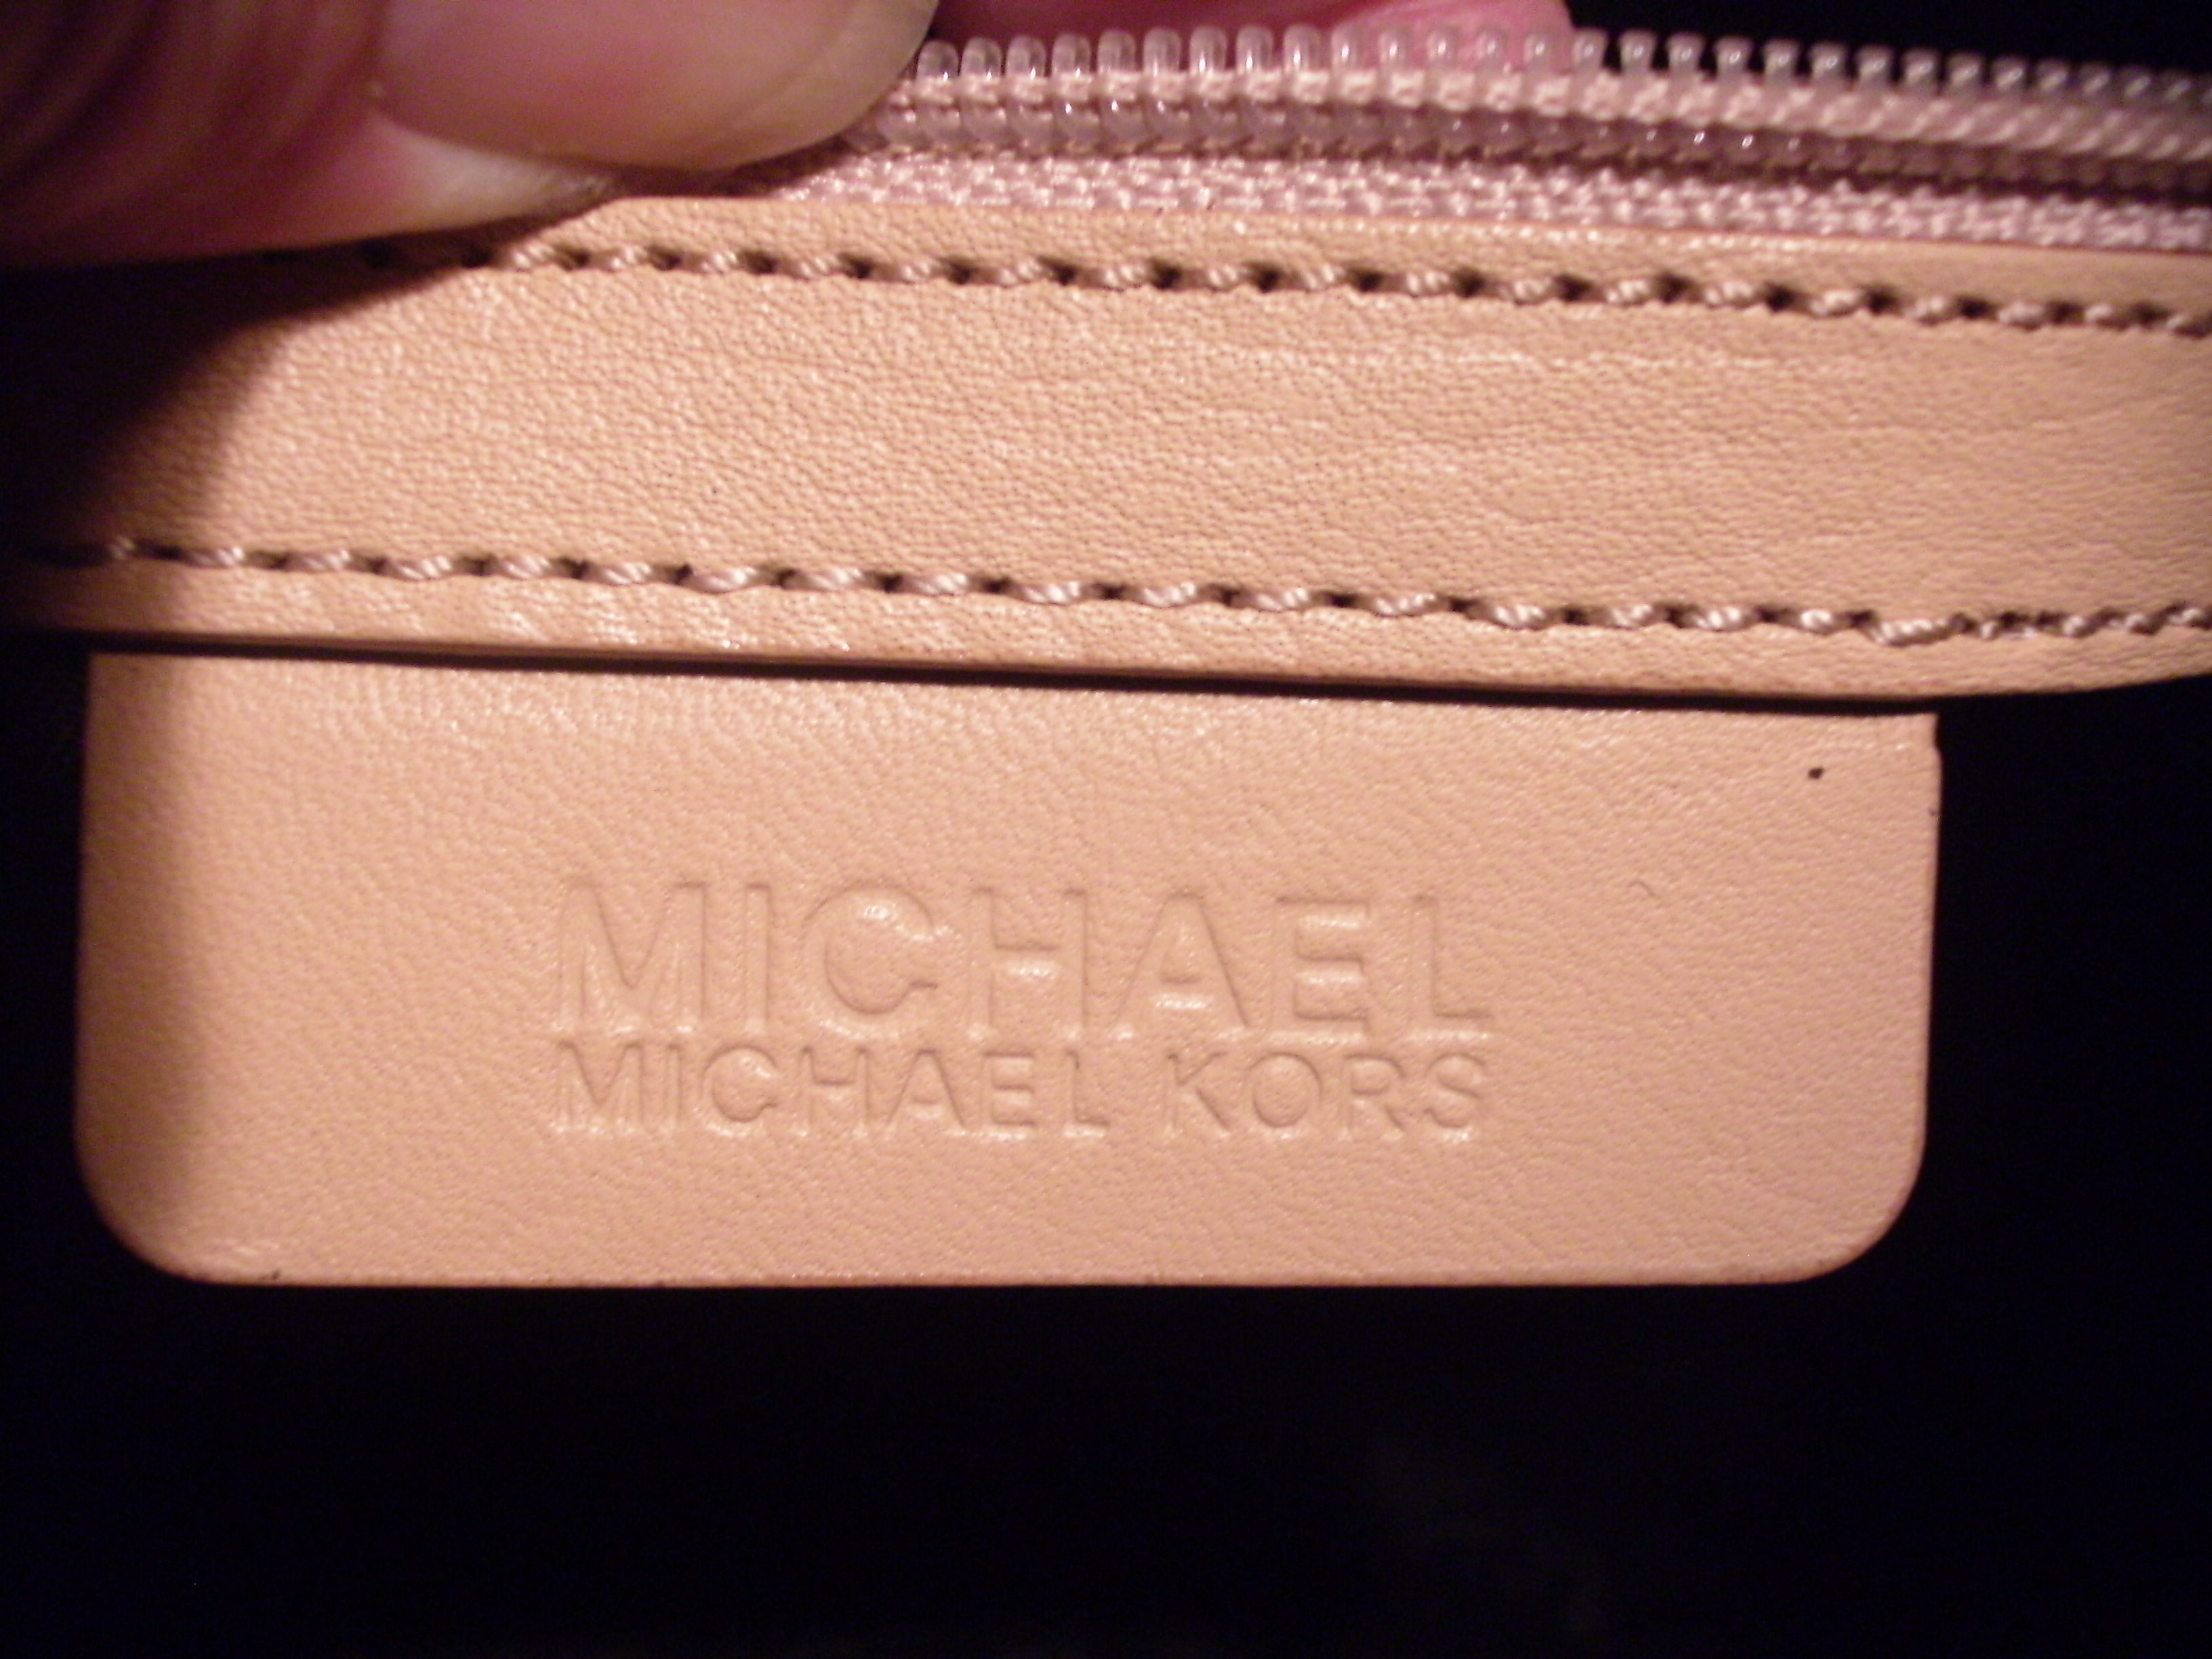 michael kors made in china